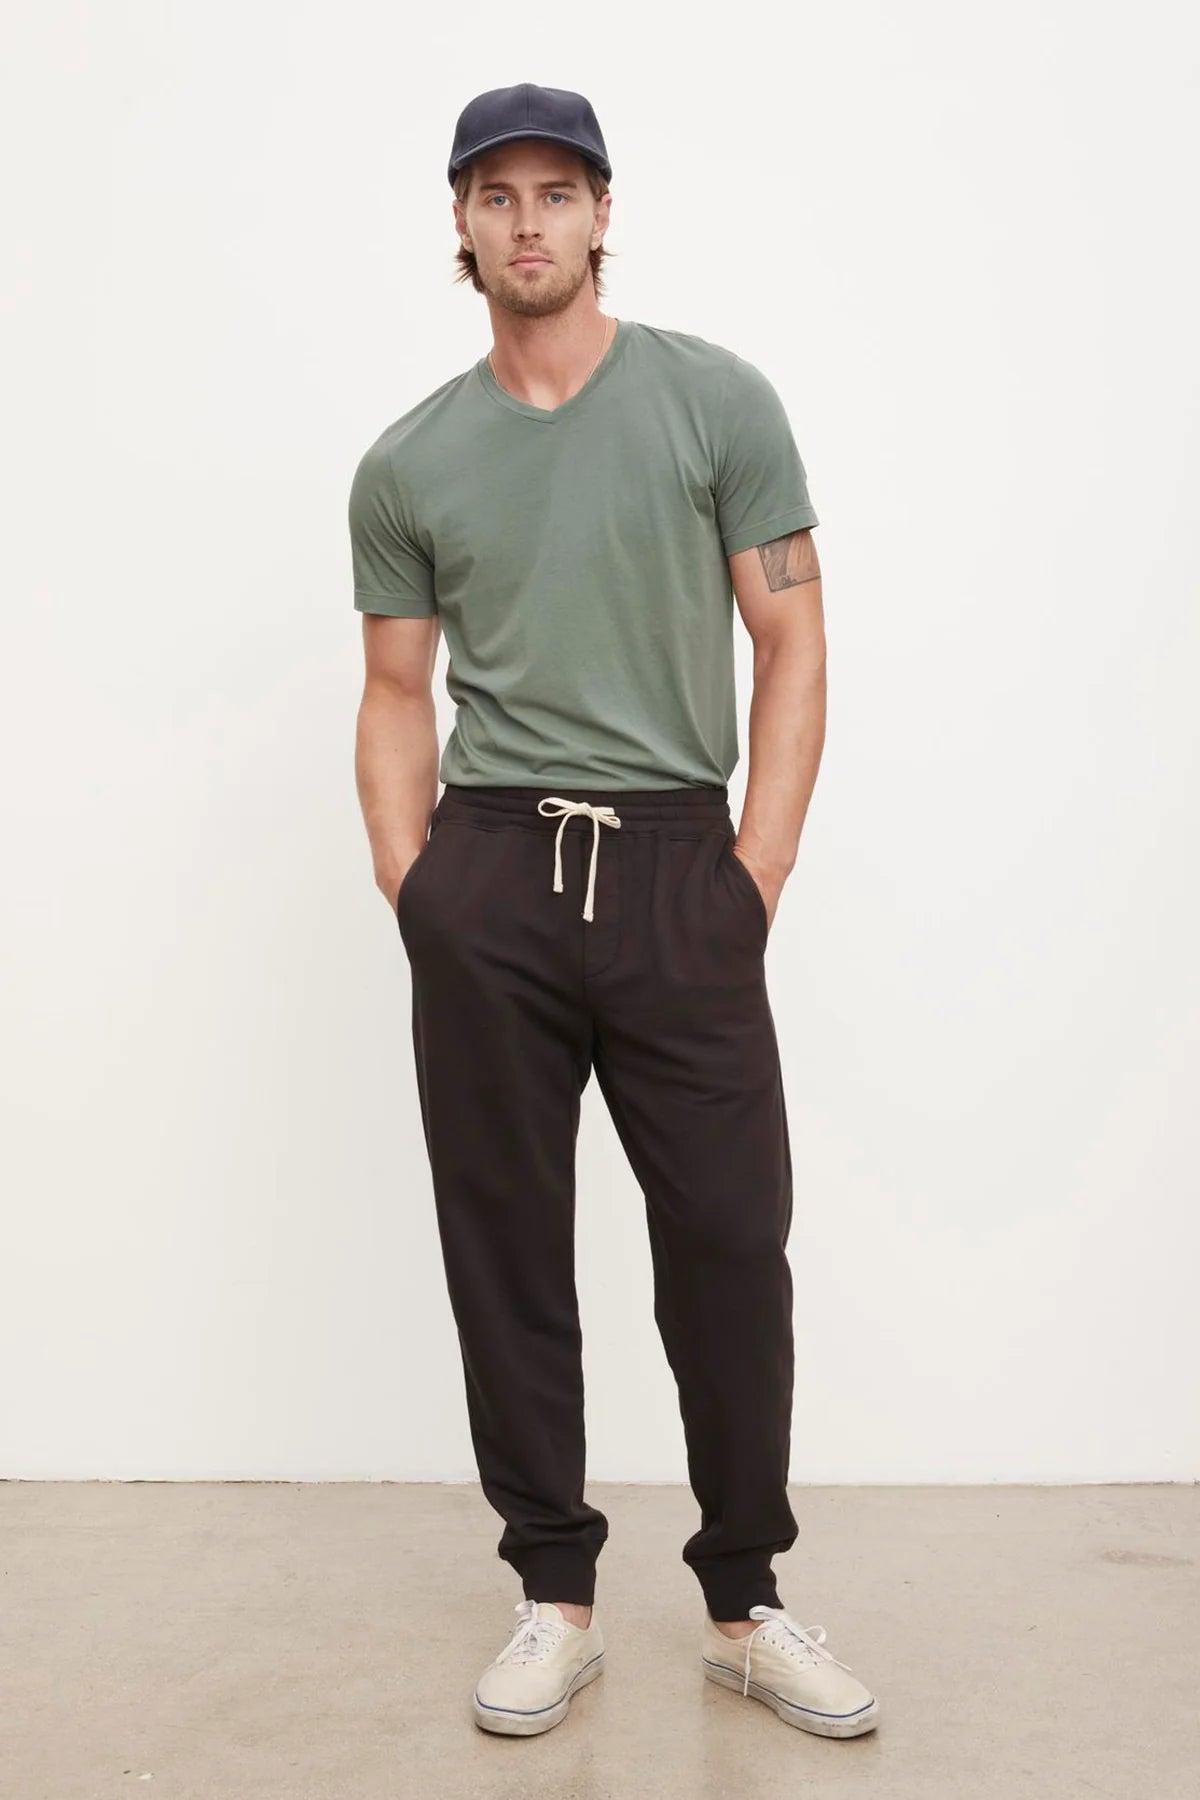 DUSTY FRENCH TERRY JOGGER - BRIMSTONE